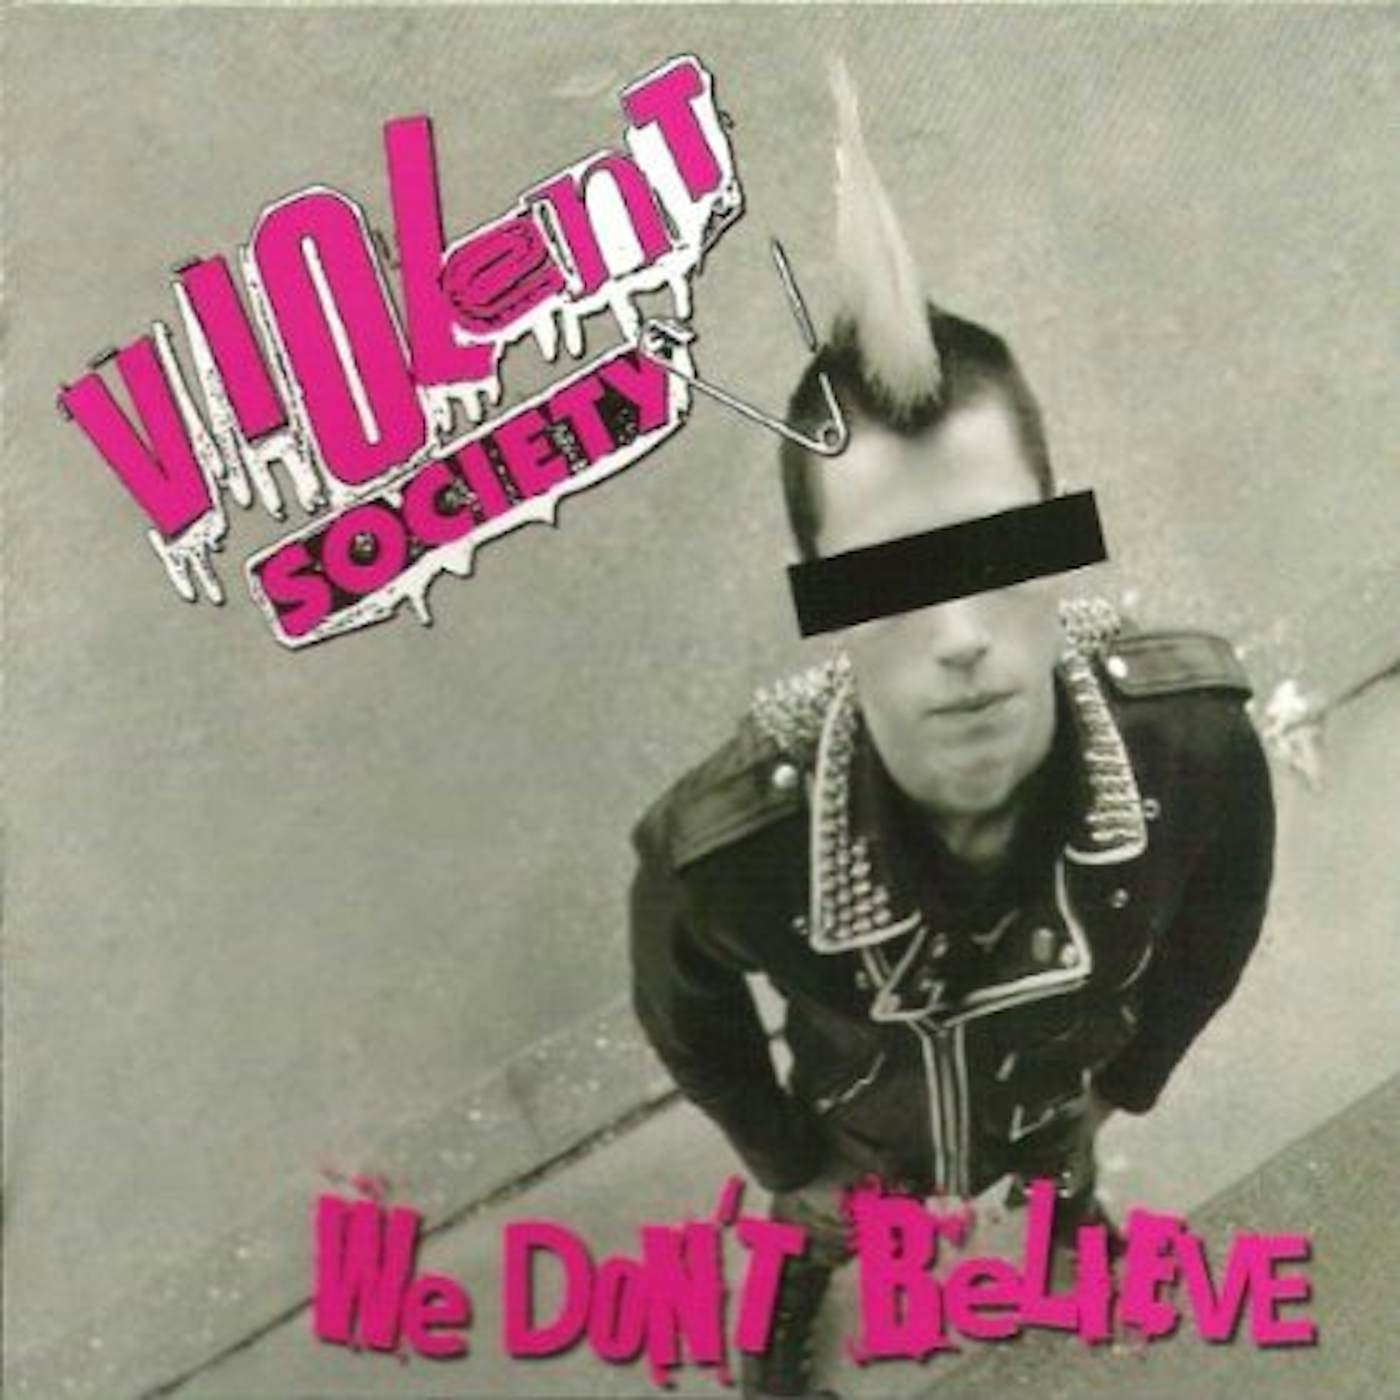 Violent Society WE DONT BELIEVE CD